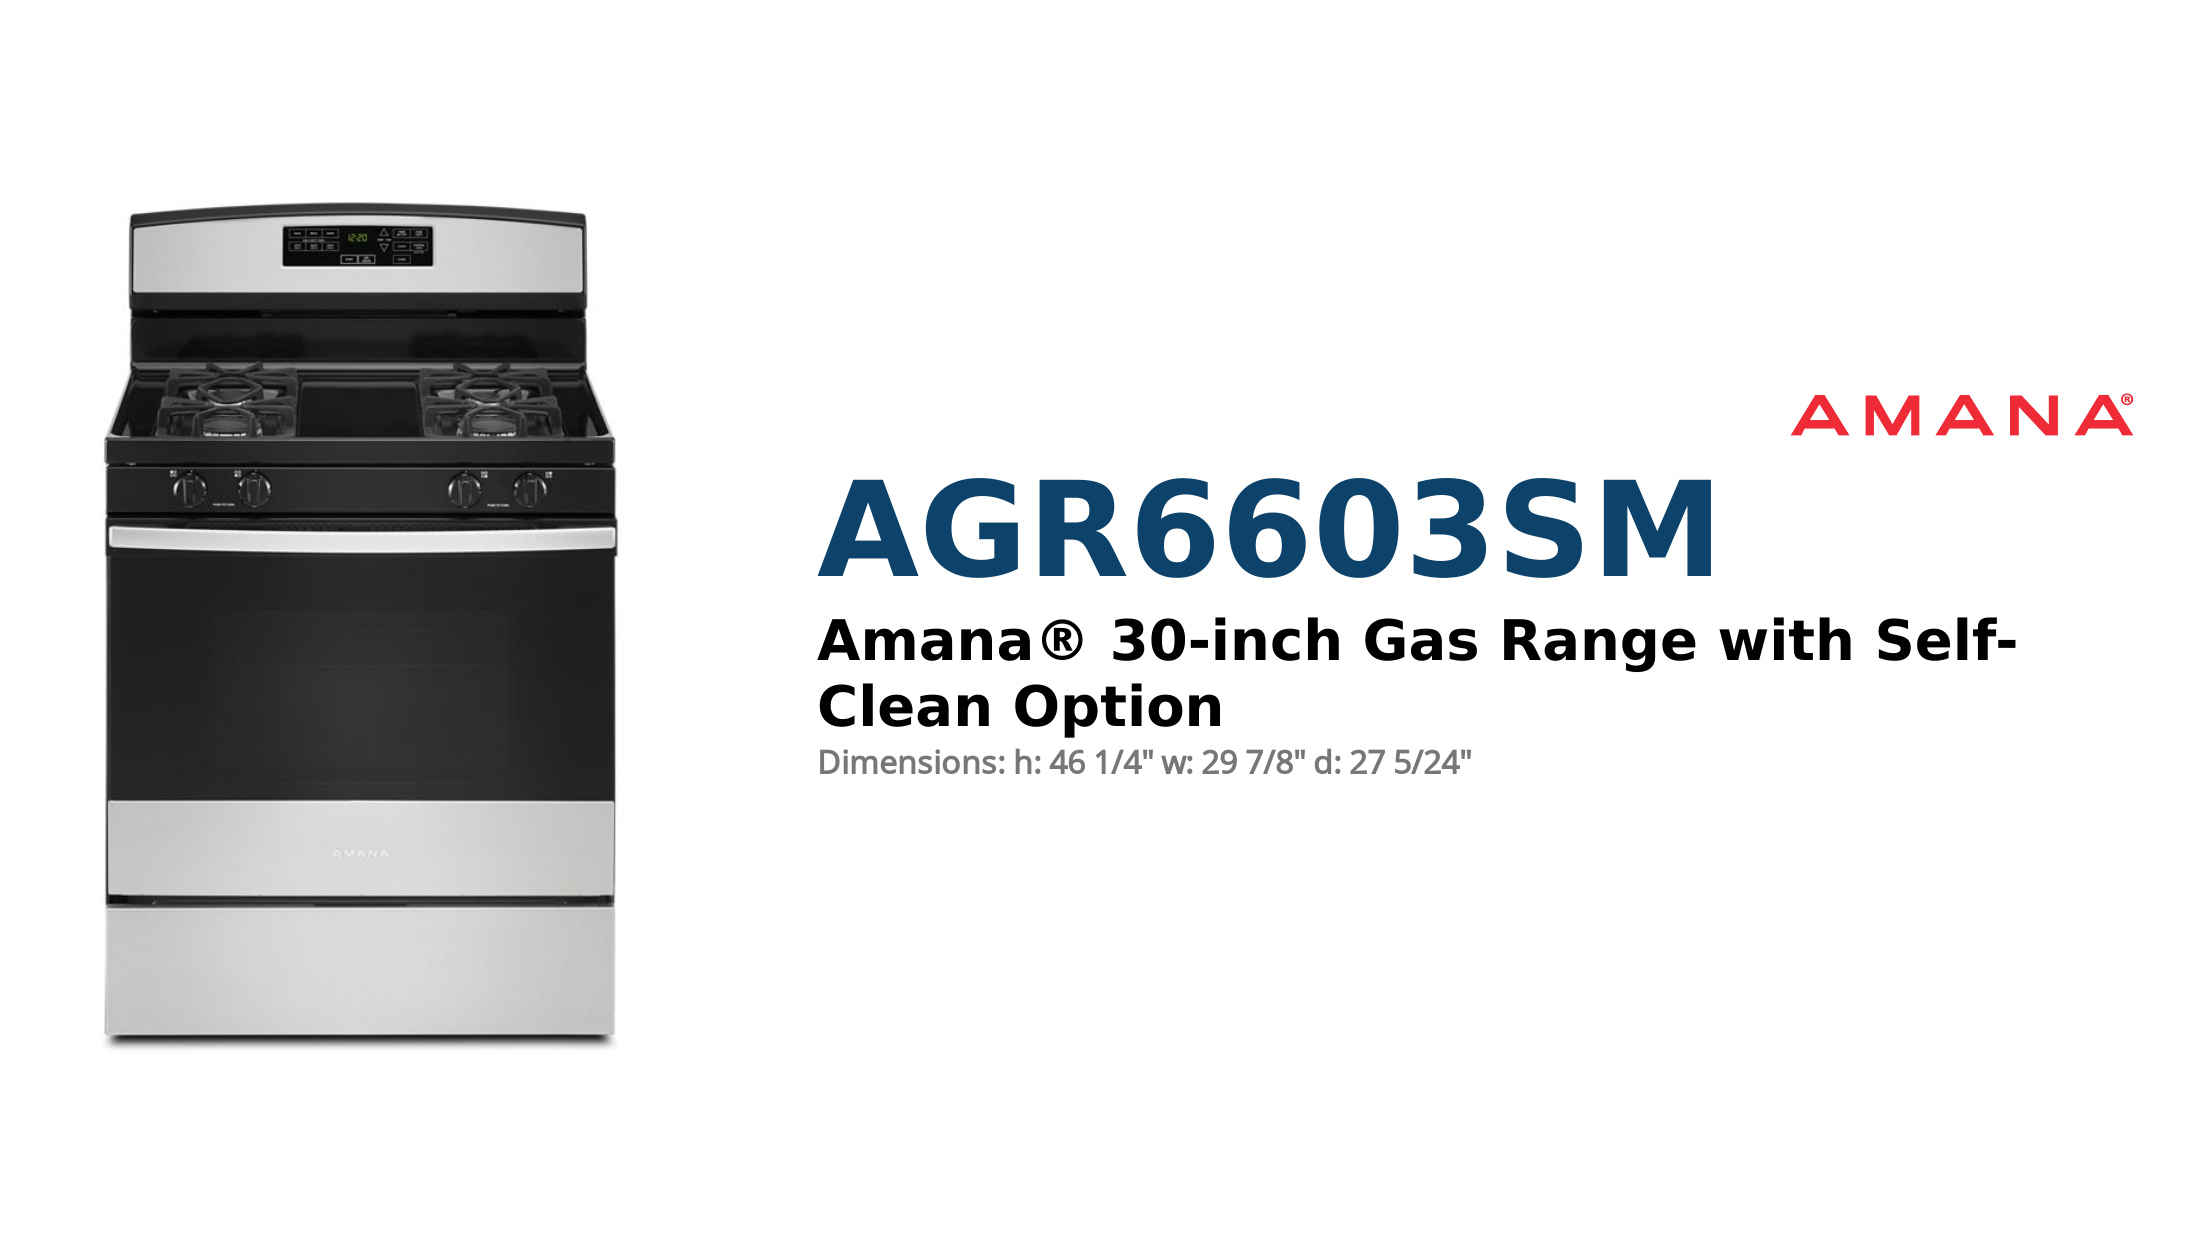 Amana® 30-inch Gas Range with Self-Clean Option